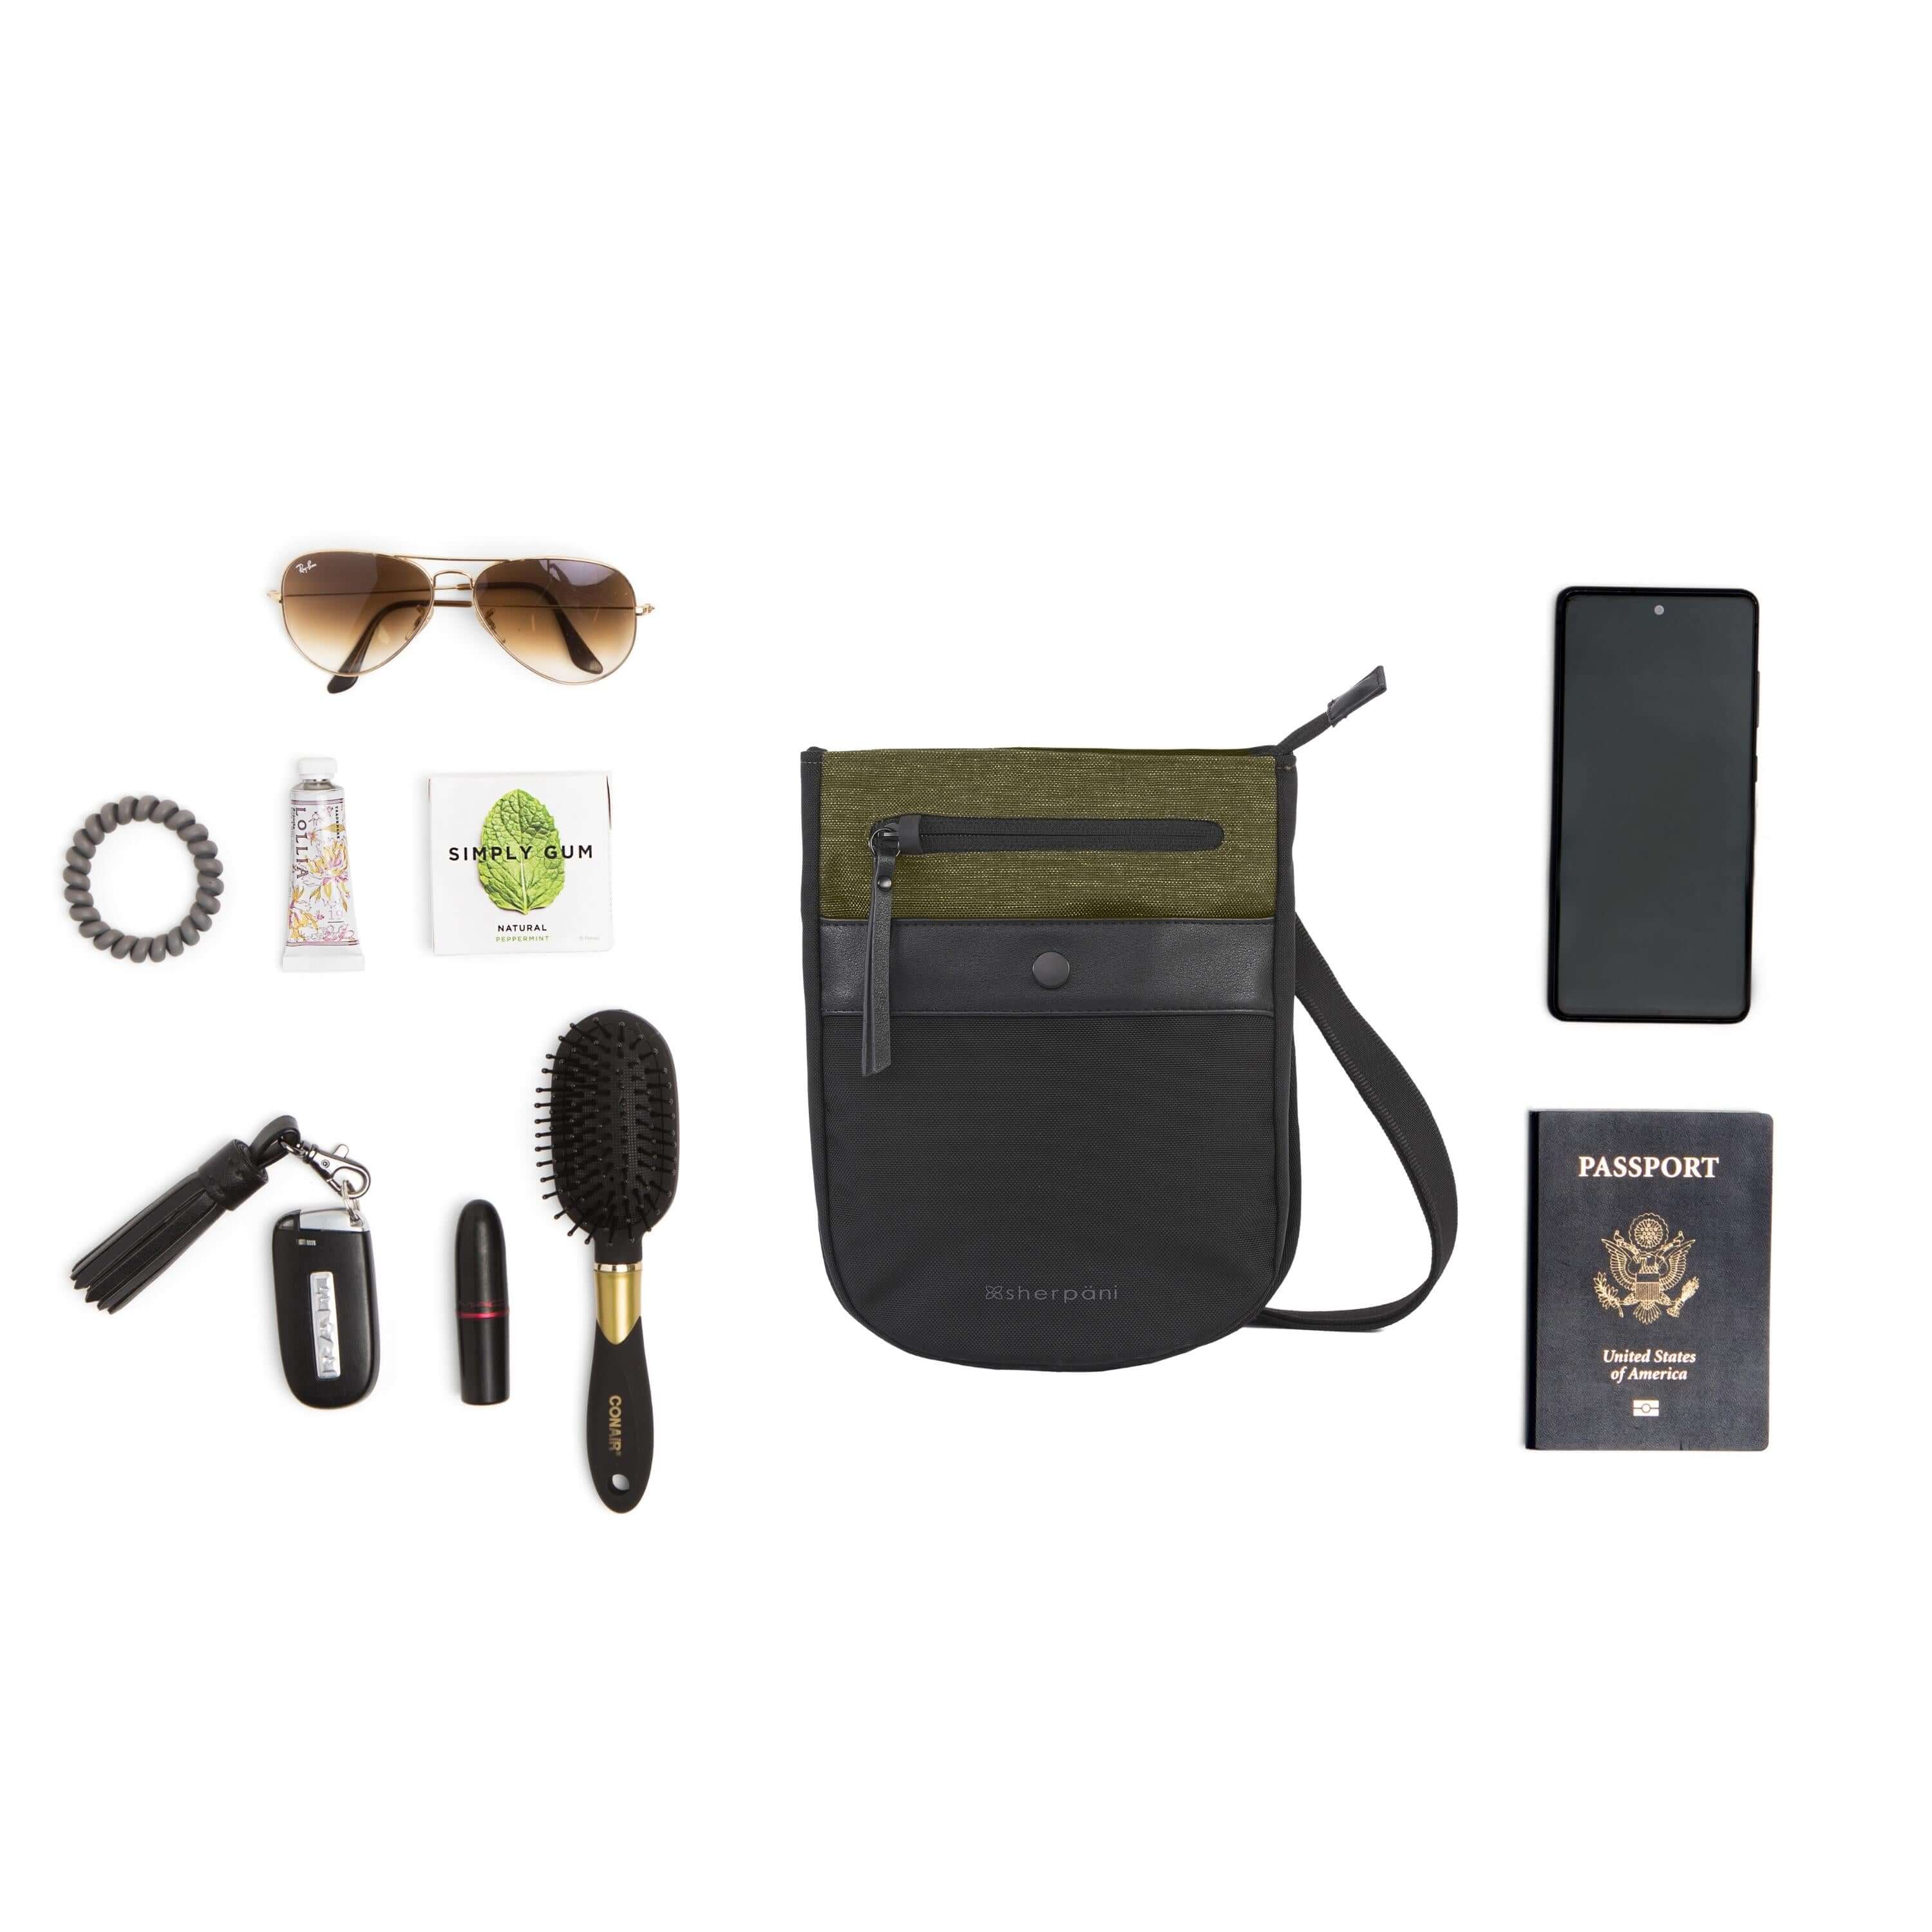 Top view of example items to fill the bag. Sherpani’s Anti-Theft bag, the Prima AT in Loden, lies in the center. It is surrounded by an assortment of items: hairbrush, lipstick, car key, hair tie, lotion, gum, sunglasses, phone and passport. 